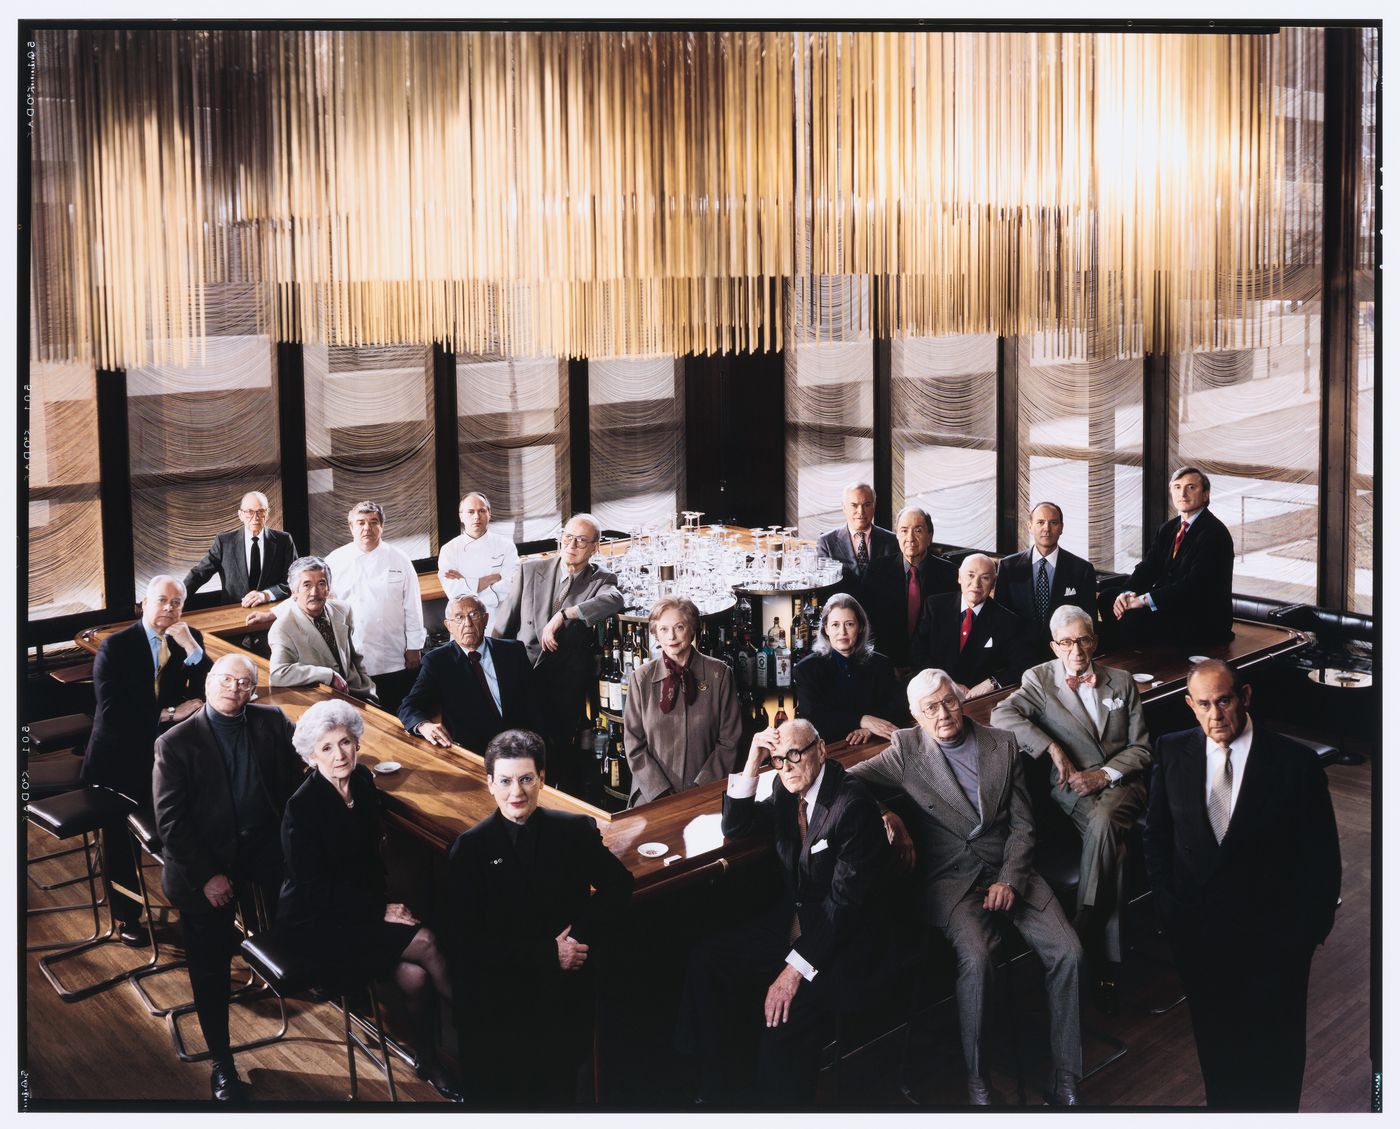 Group portrait of the original creative team of the Four Seasons Restaurant Grill Room, including Phyllis Lambert and Philip Johnson, Restaurant Four Seasons, Seagram Building, New York City, New York, United States